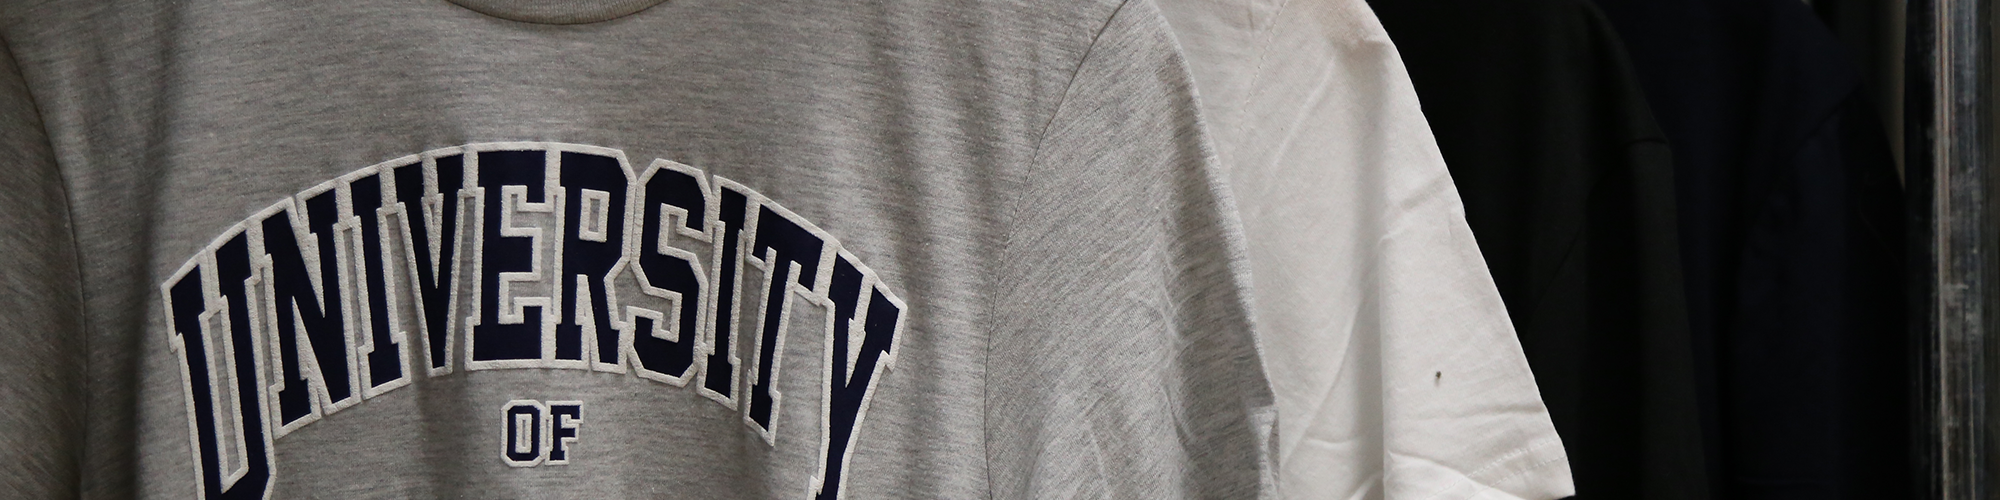 If you're looking for personalised clothing for your society then you've come to the right place. Ordering personalised University clothing is quick and easy.